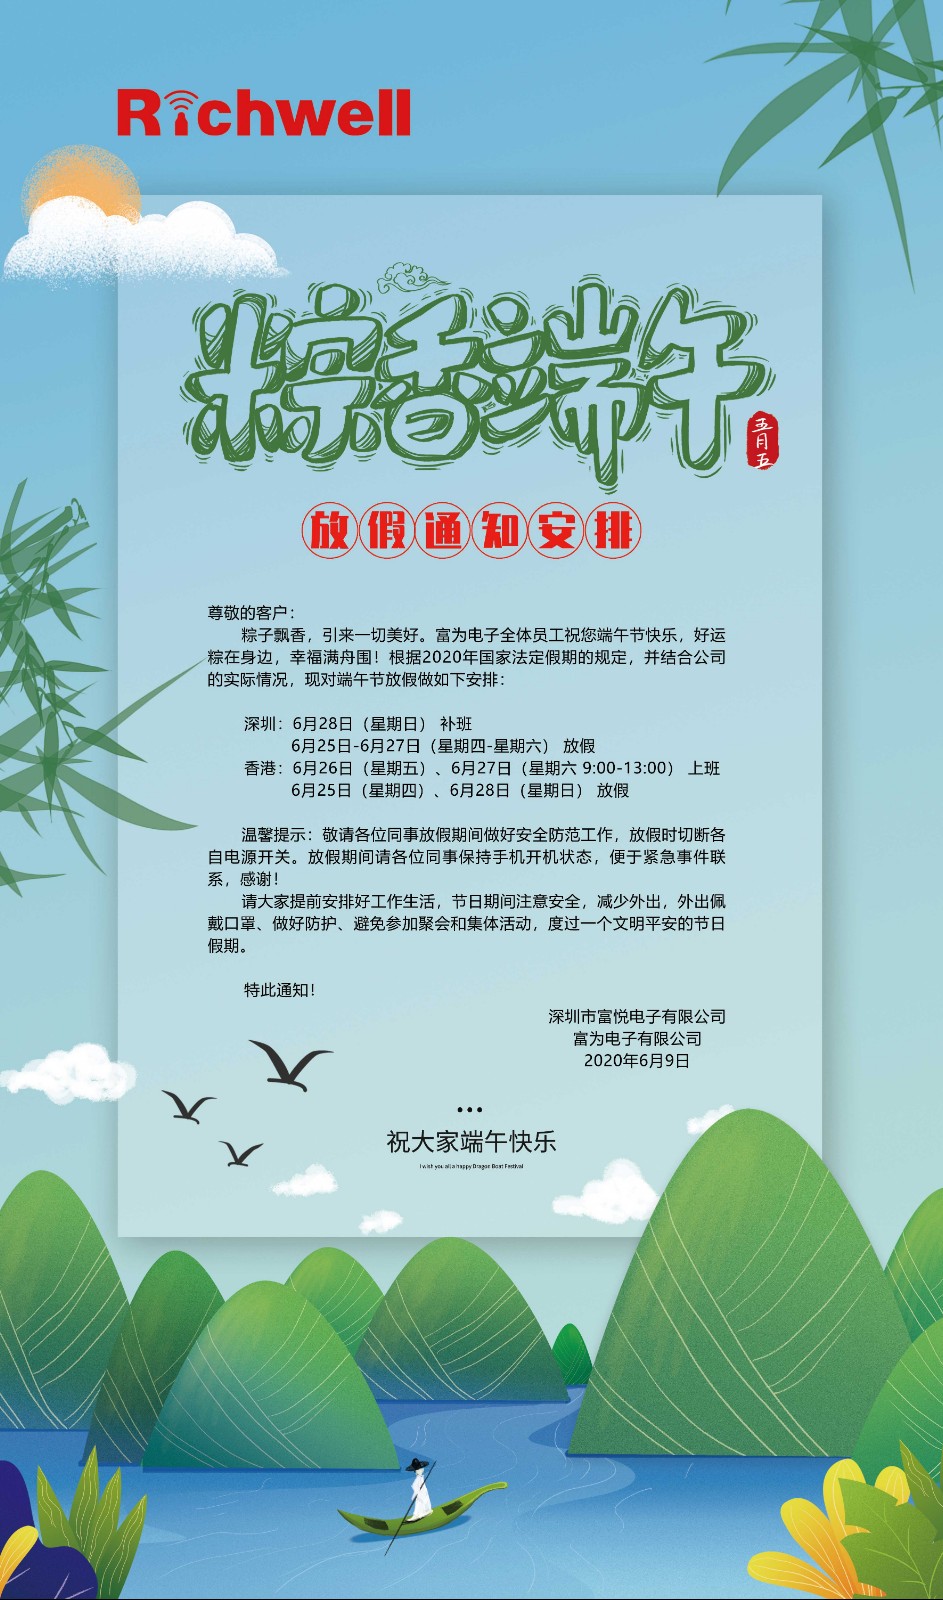 Notice of Dragon Boat Festival holiday in 2020